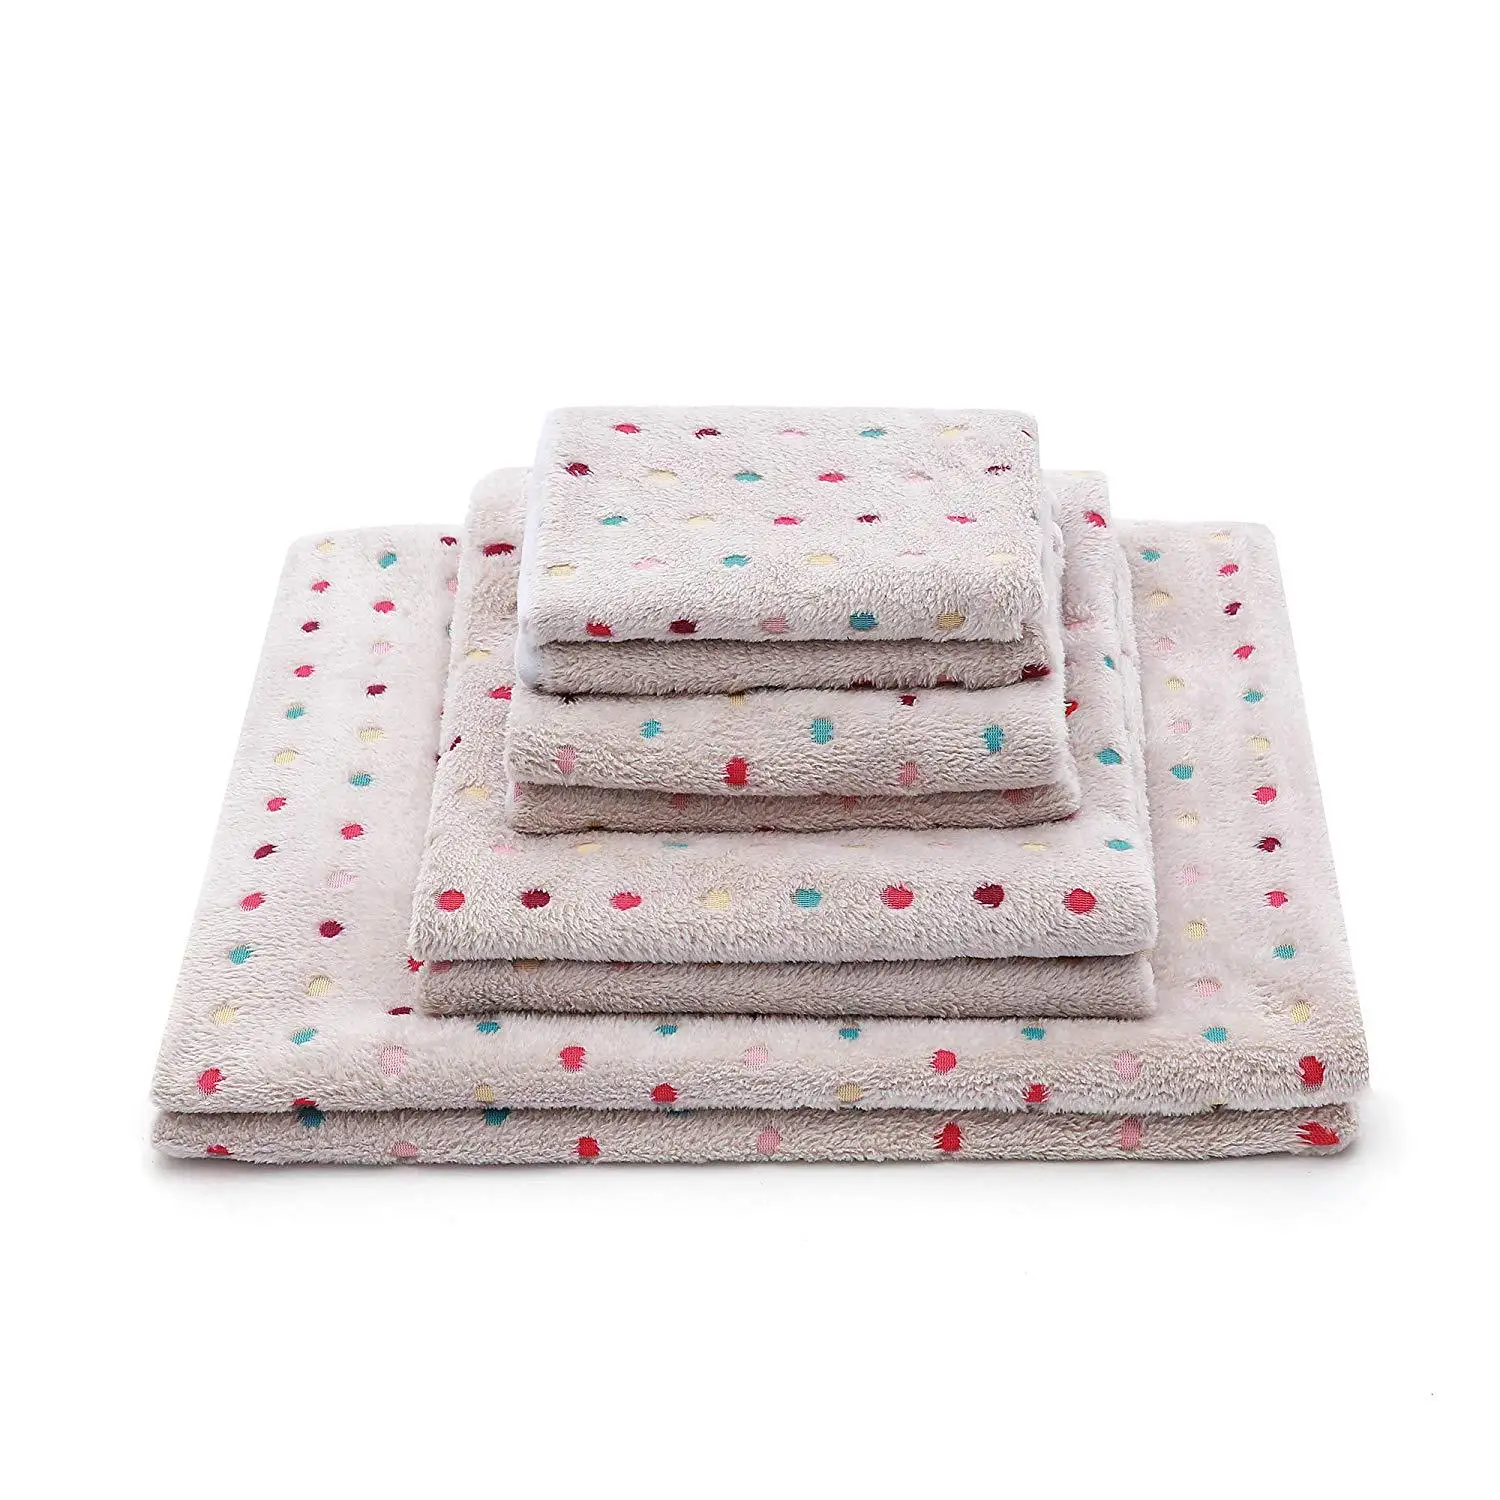 

Manufacturer Wholesale Multi-colors Paw Print Pet Heating Pad Large Dog Bed Blanket Luxury Dog Beds And Blankets, 7 patterns